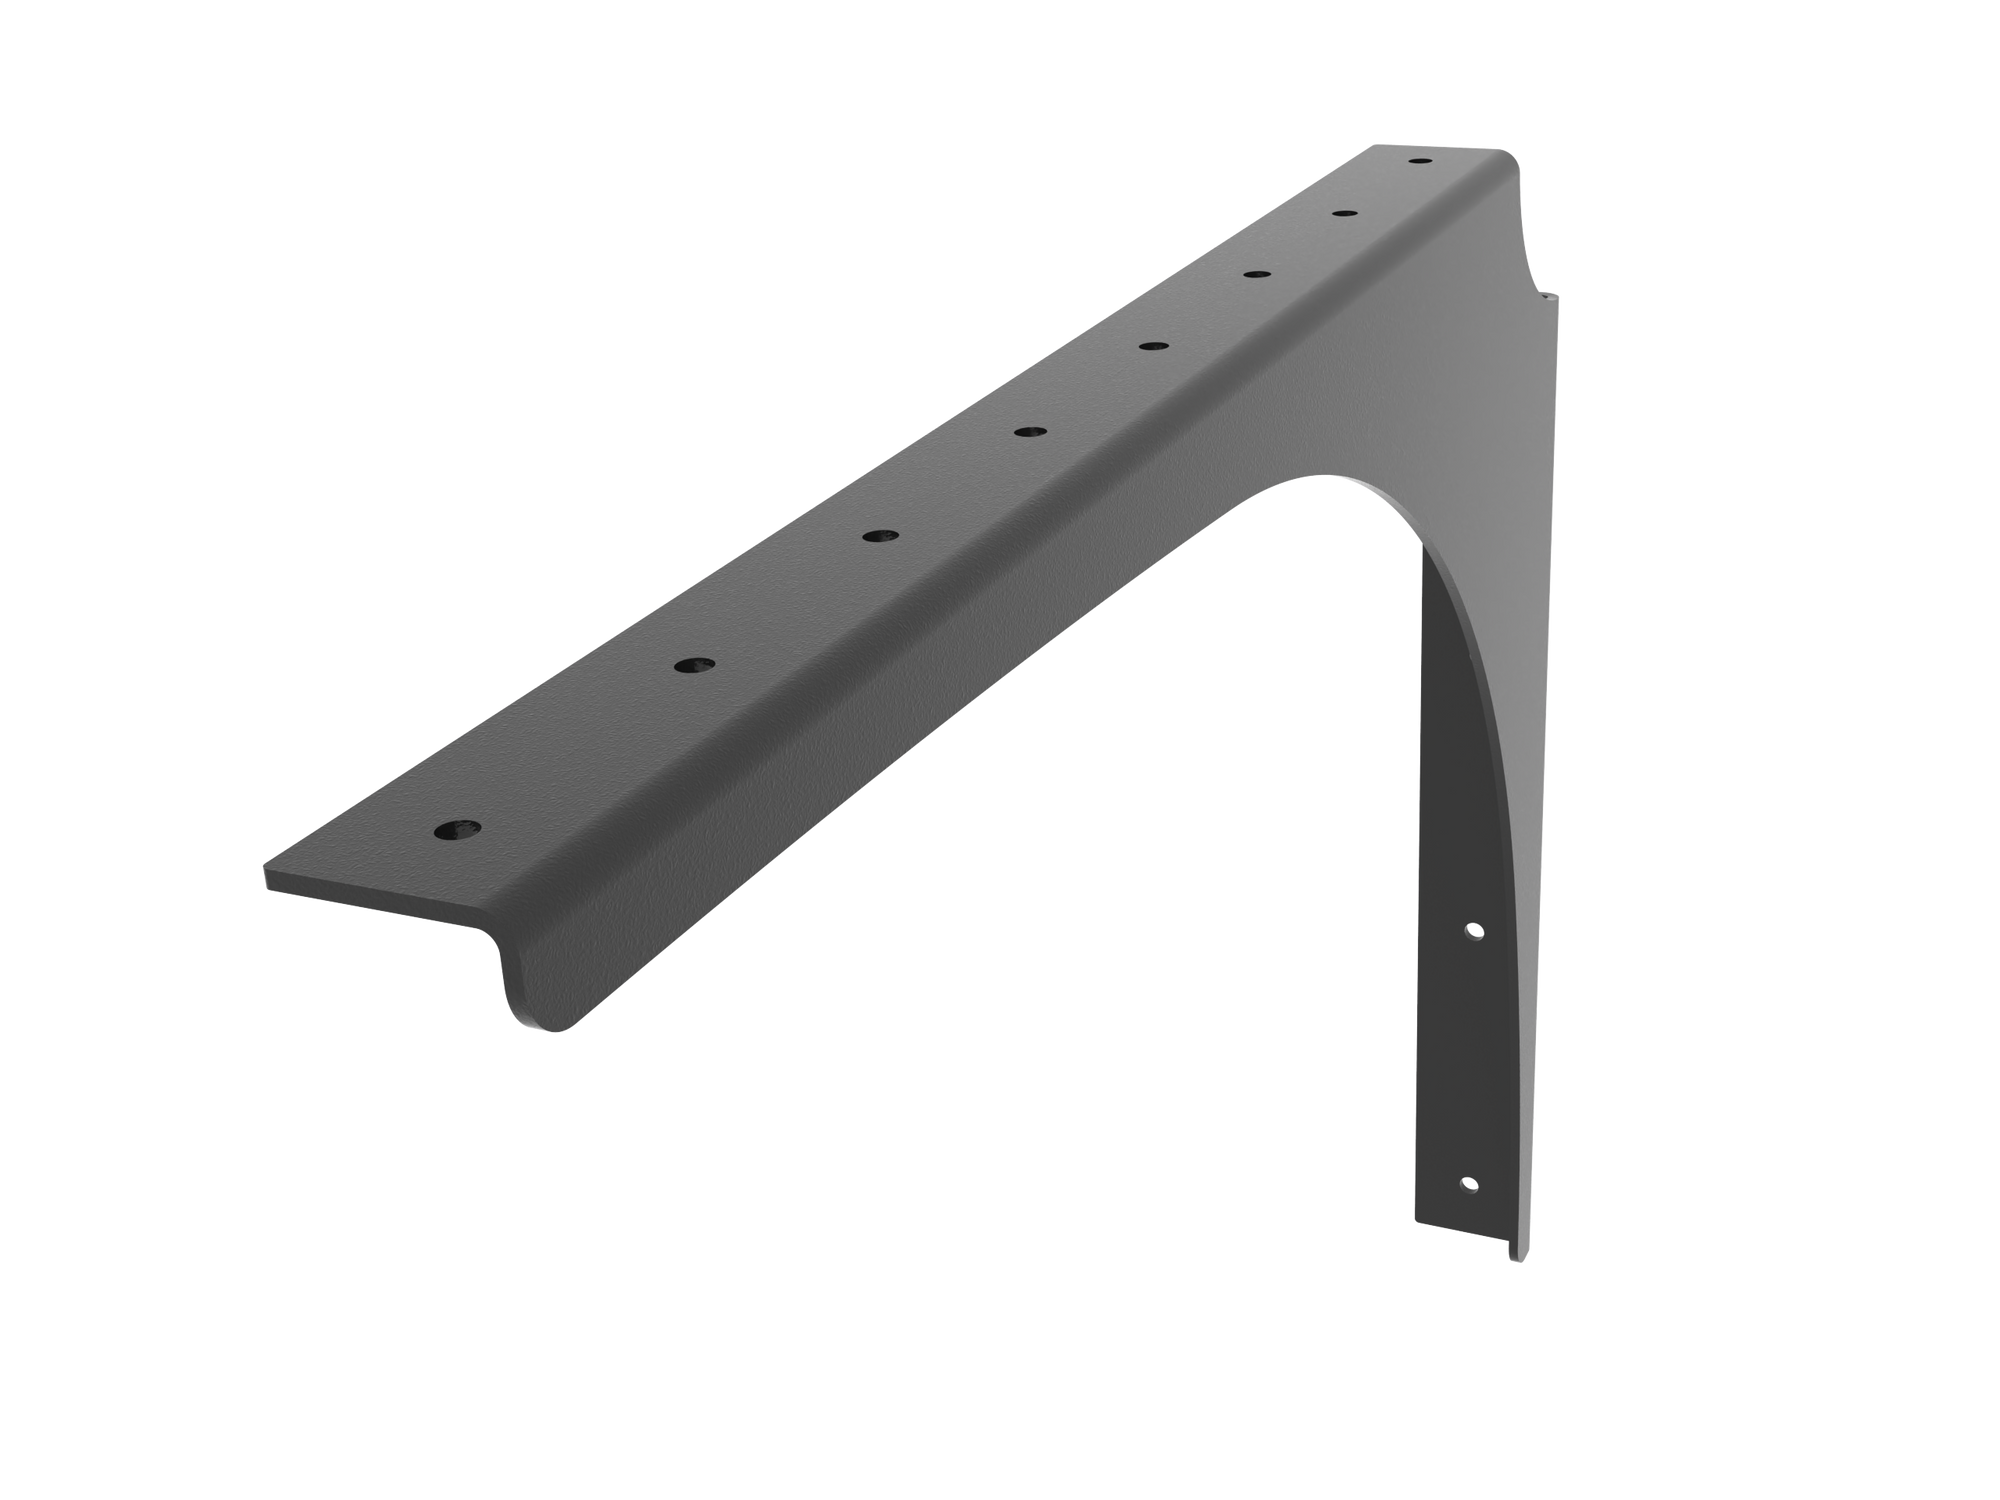 Universal Commercial Support Bracket - 21" x 15" Right Handed with Black Powder Coat Finish. Supports floating ADA-compliant vanities, desks, shelving, countertops, and more.